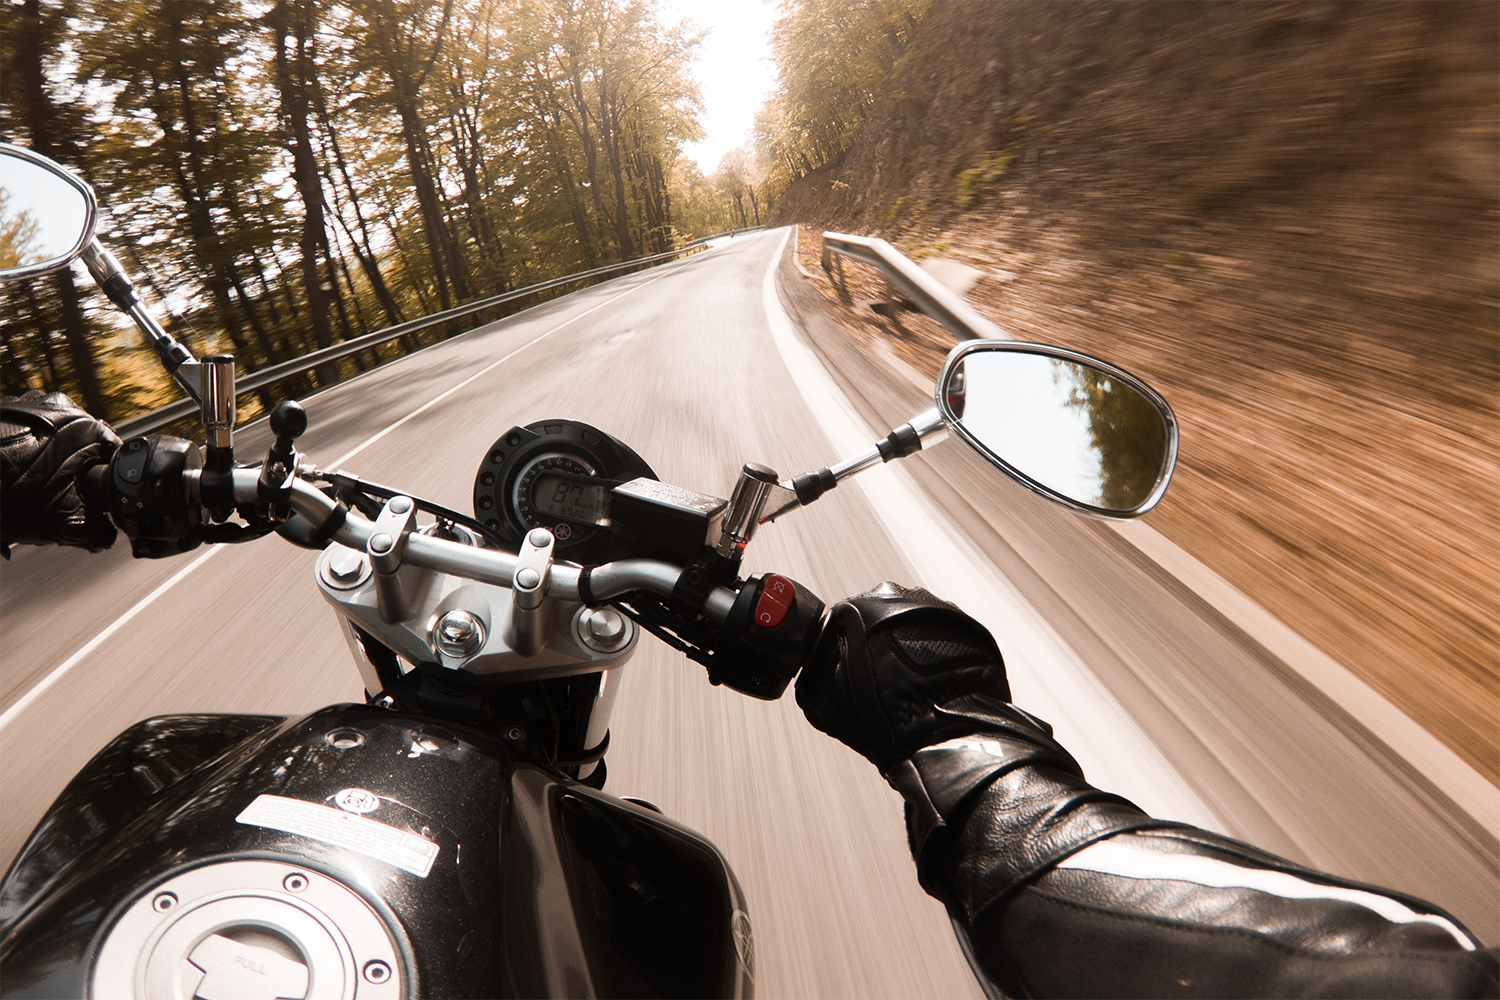 The handlebars and side mirror of a motorcycle as it speeds down a winding road in the woods. A motorcycle just a record for the Cannonball Run, an illegal nationwide road race.